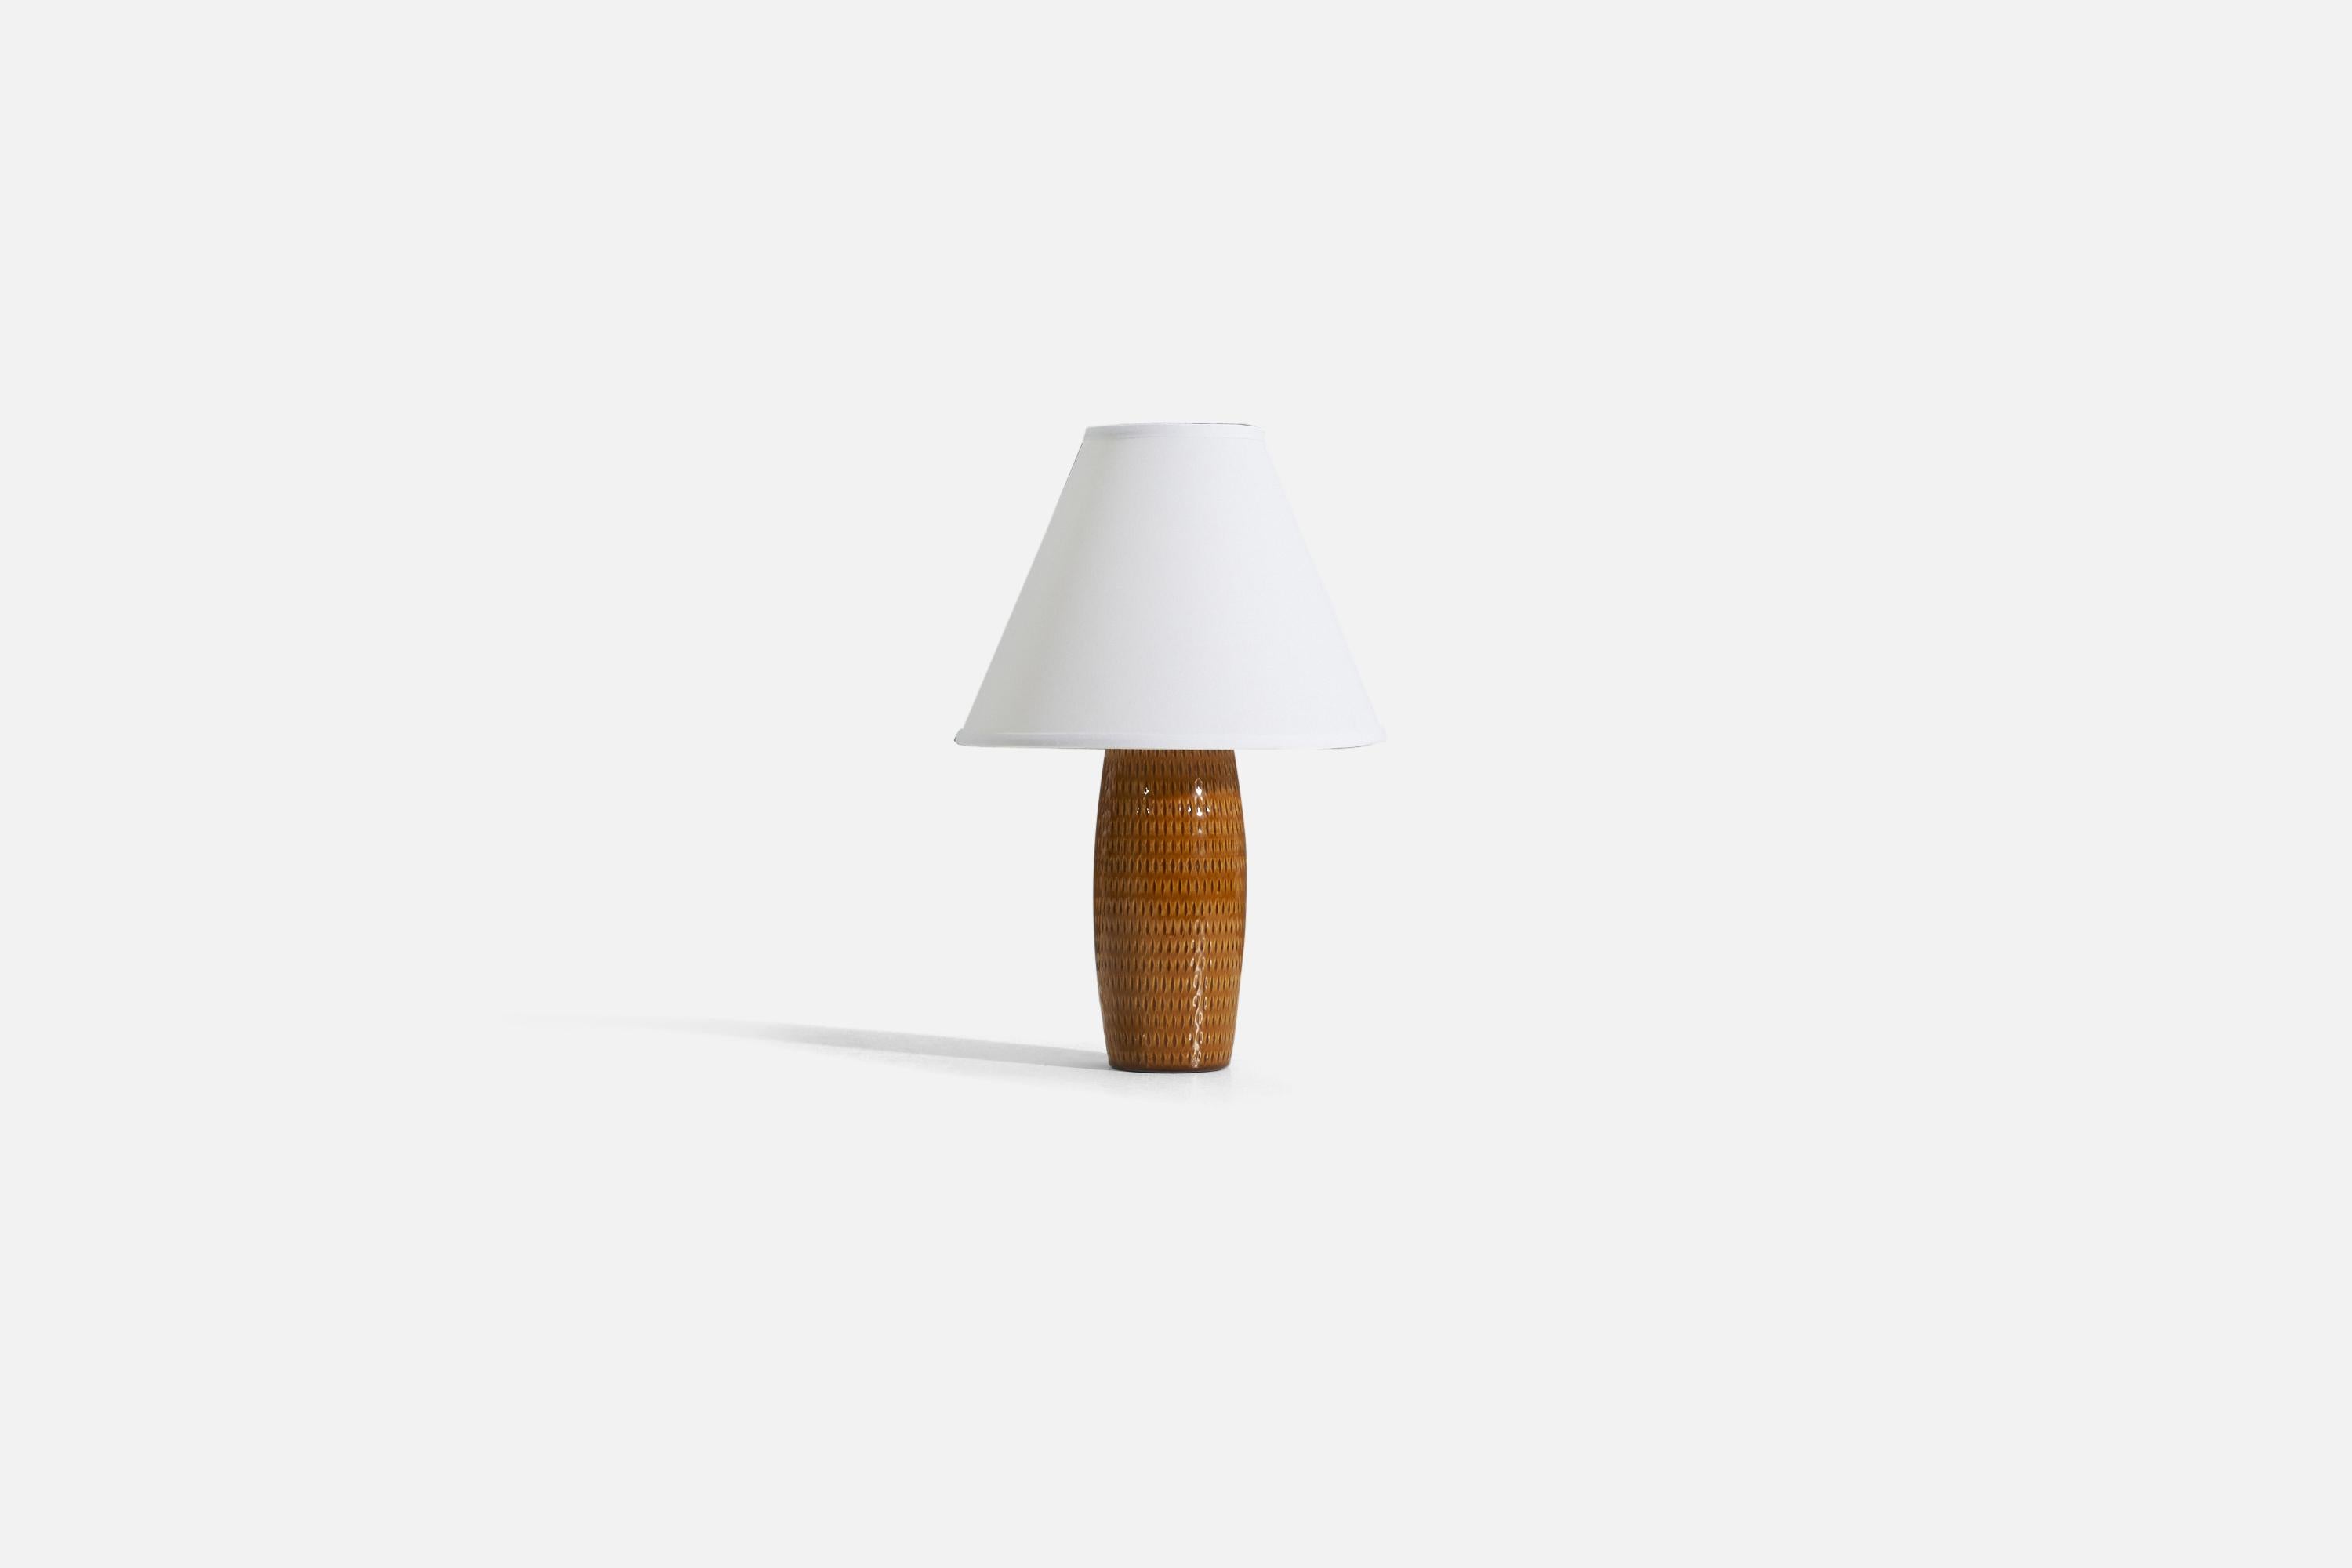 A brown-glazed earthenware table lamp produced in Sweden, c. 1950s.

Sold without lampshade. 
Dimensions of Lamp (inches) : 11 x 4 x 4 (H x W x D)
Dimensions Shade (inches) : 4 x 10 x 8 (T x B x H)
Dimension of Lamp with shade (inches) : 15 x